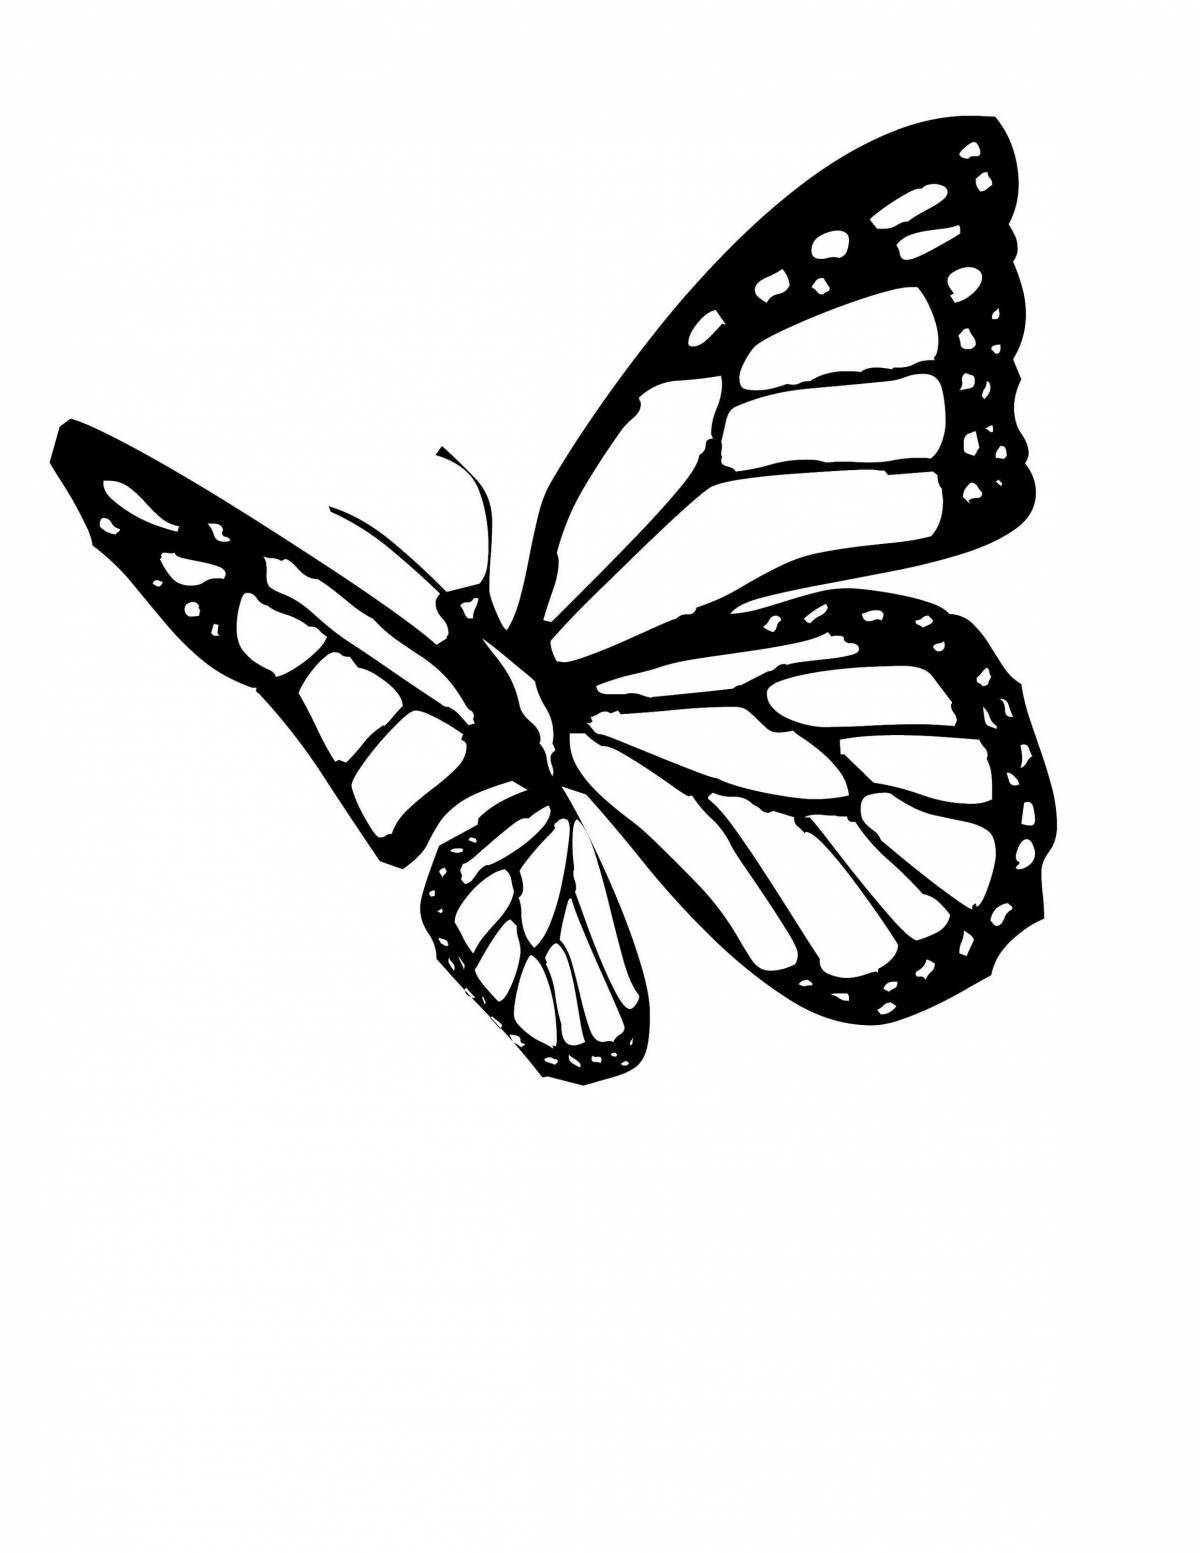 Coloring book gorgeous black and white butterflies